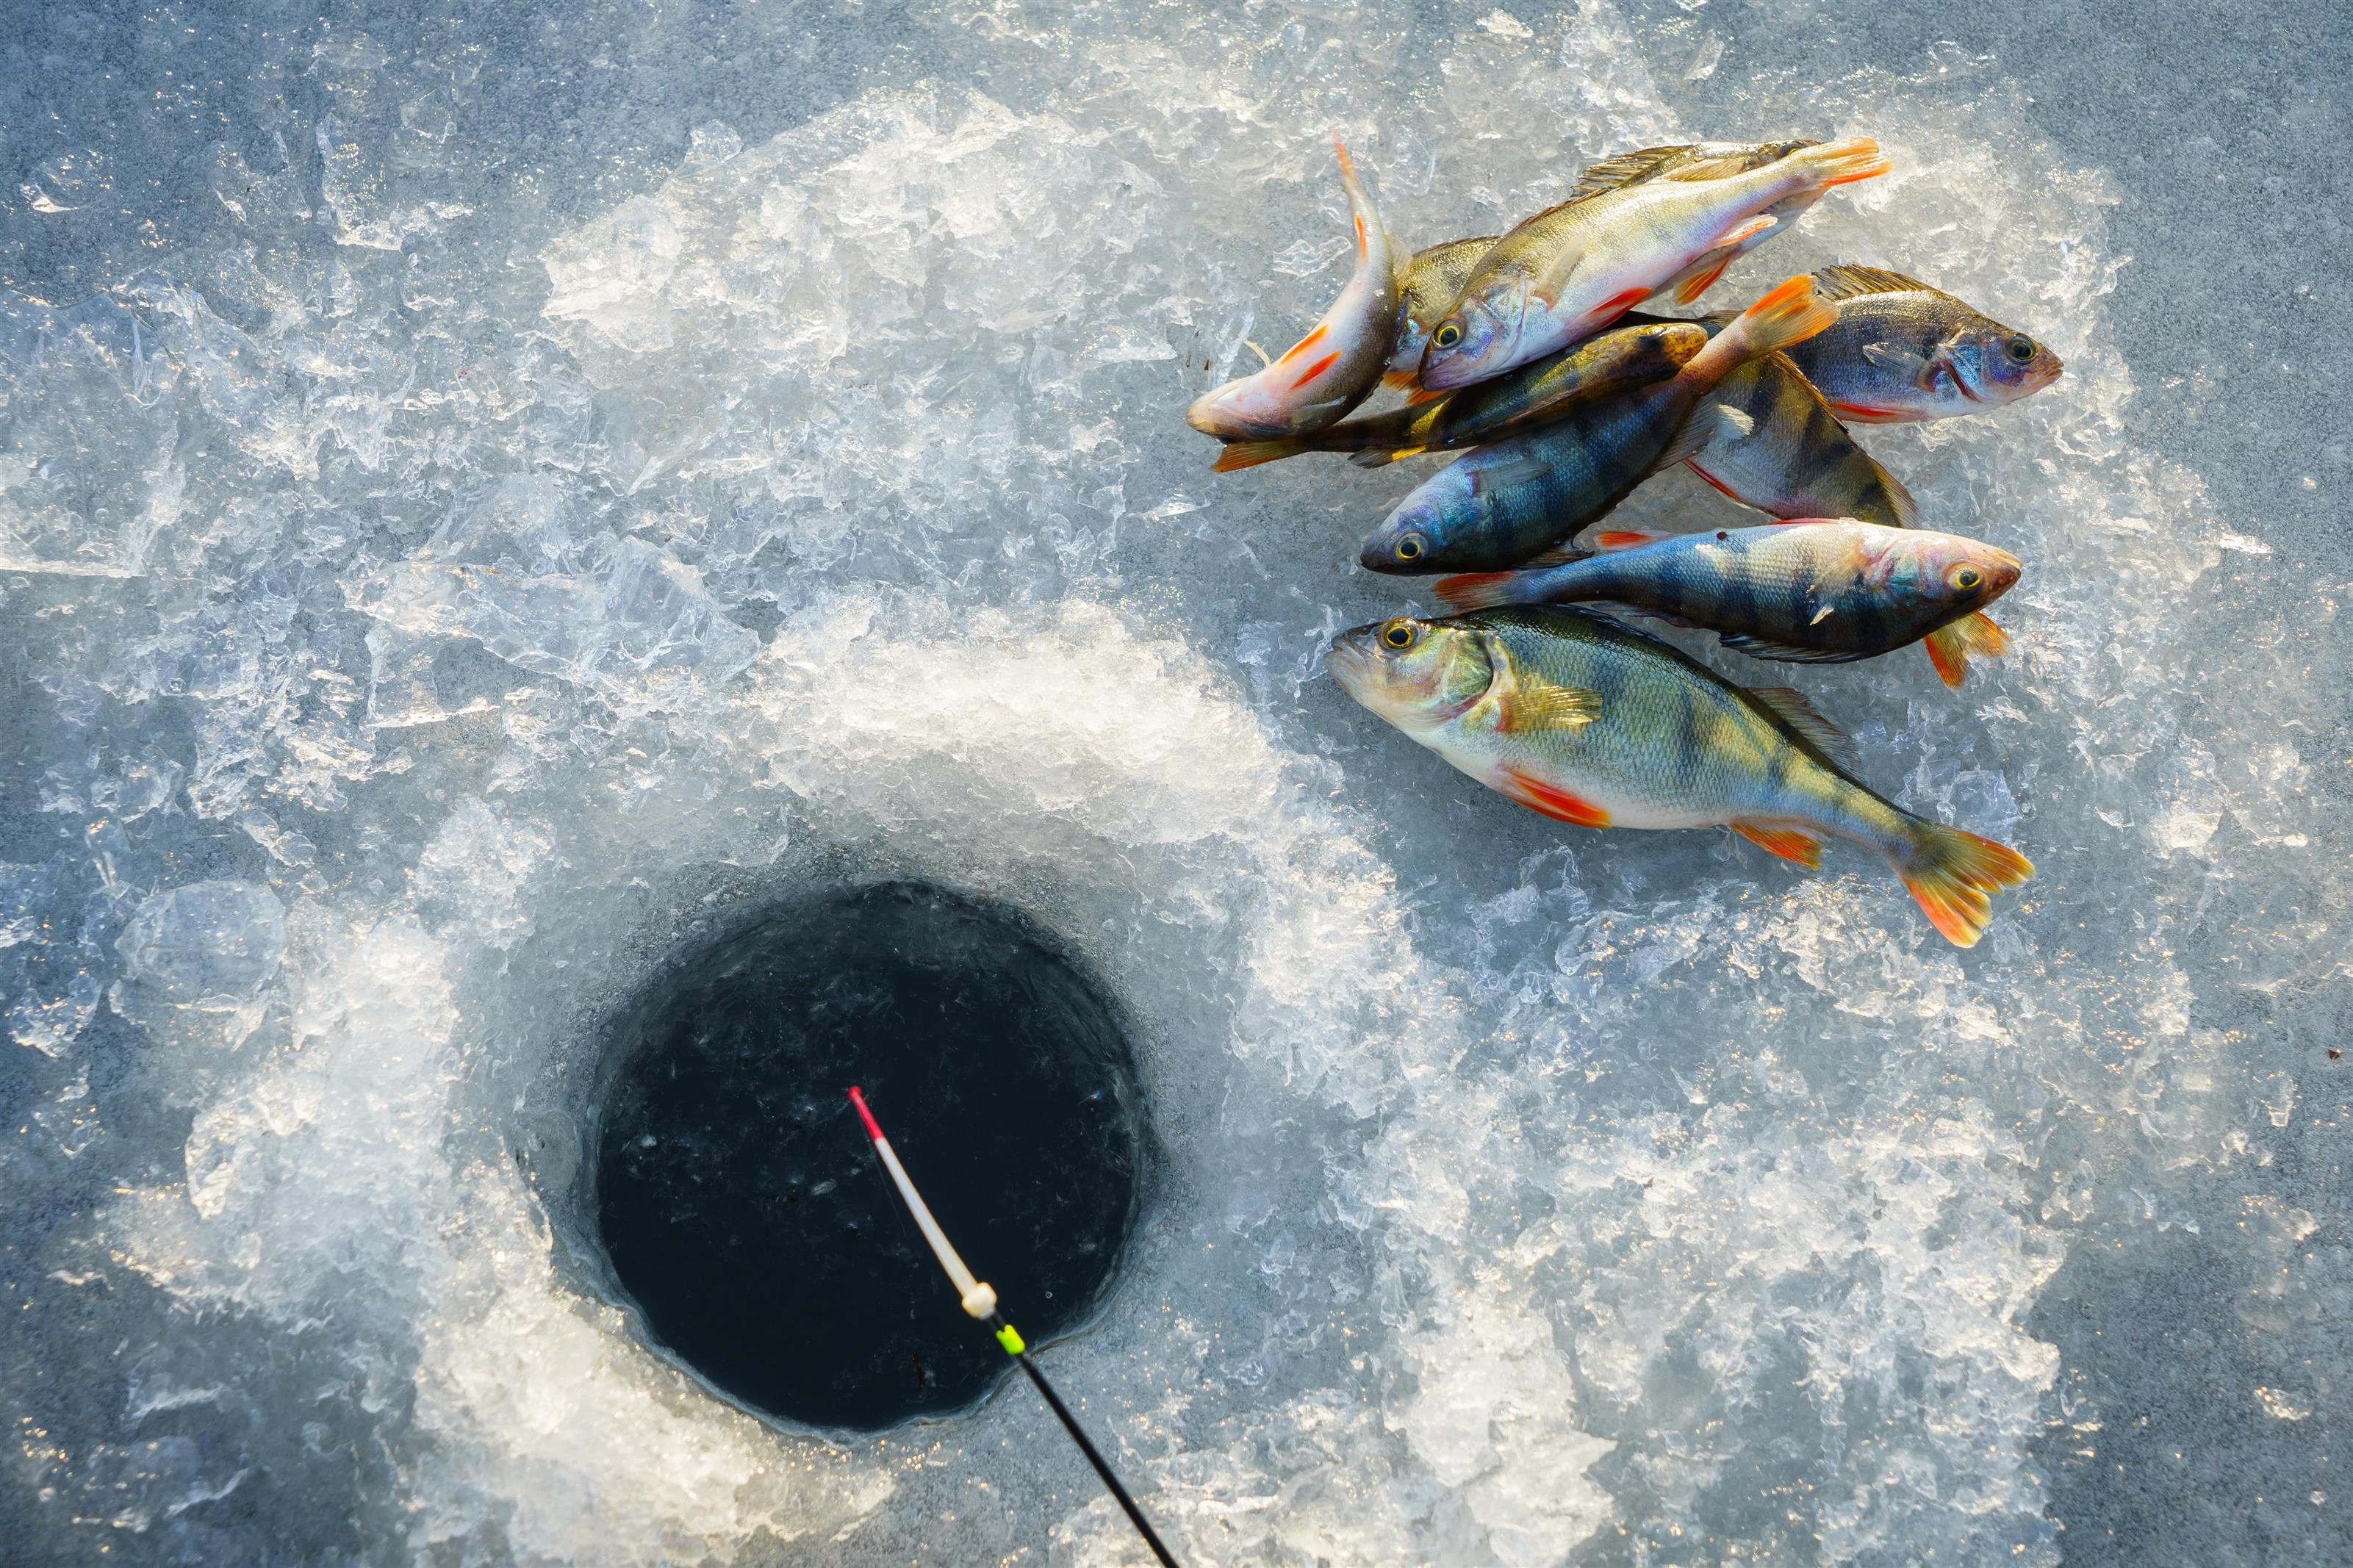 Ice Fishing, Ice fishing adventures, Winter angling, Frozen landscapes, 3210x2140 HD Desktop